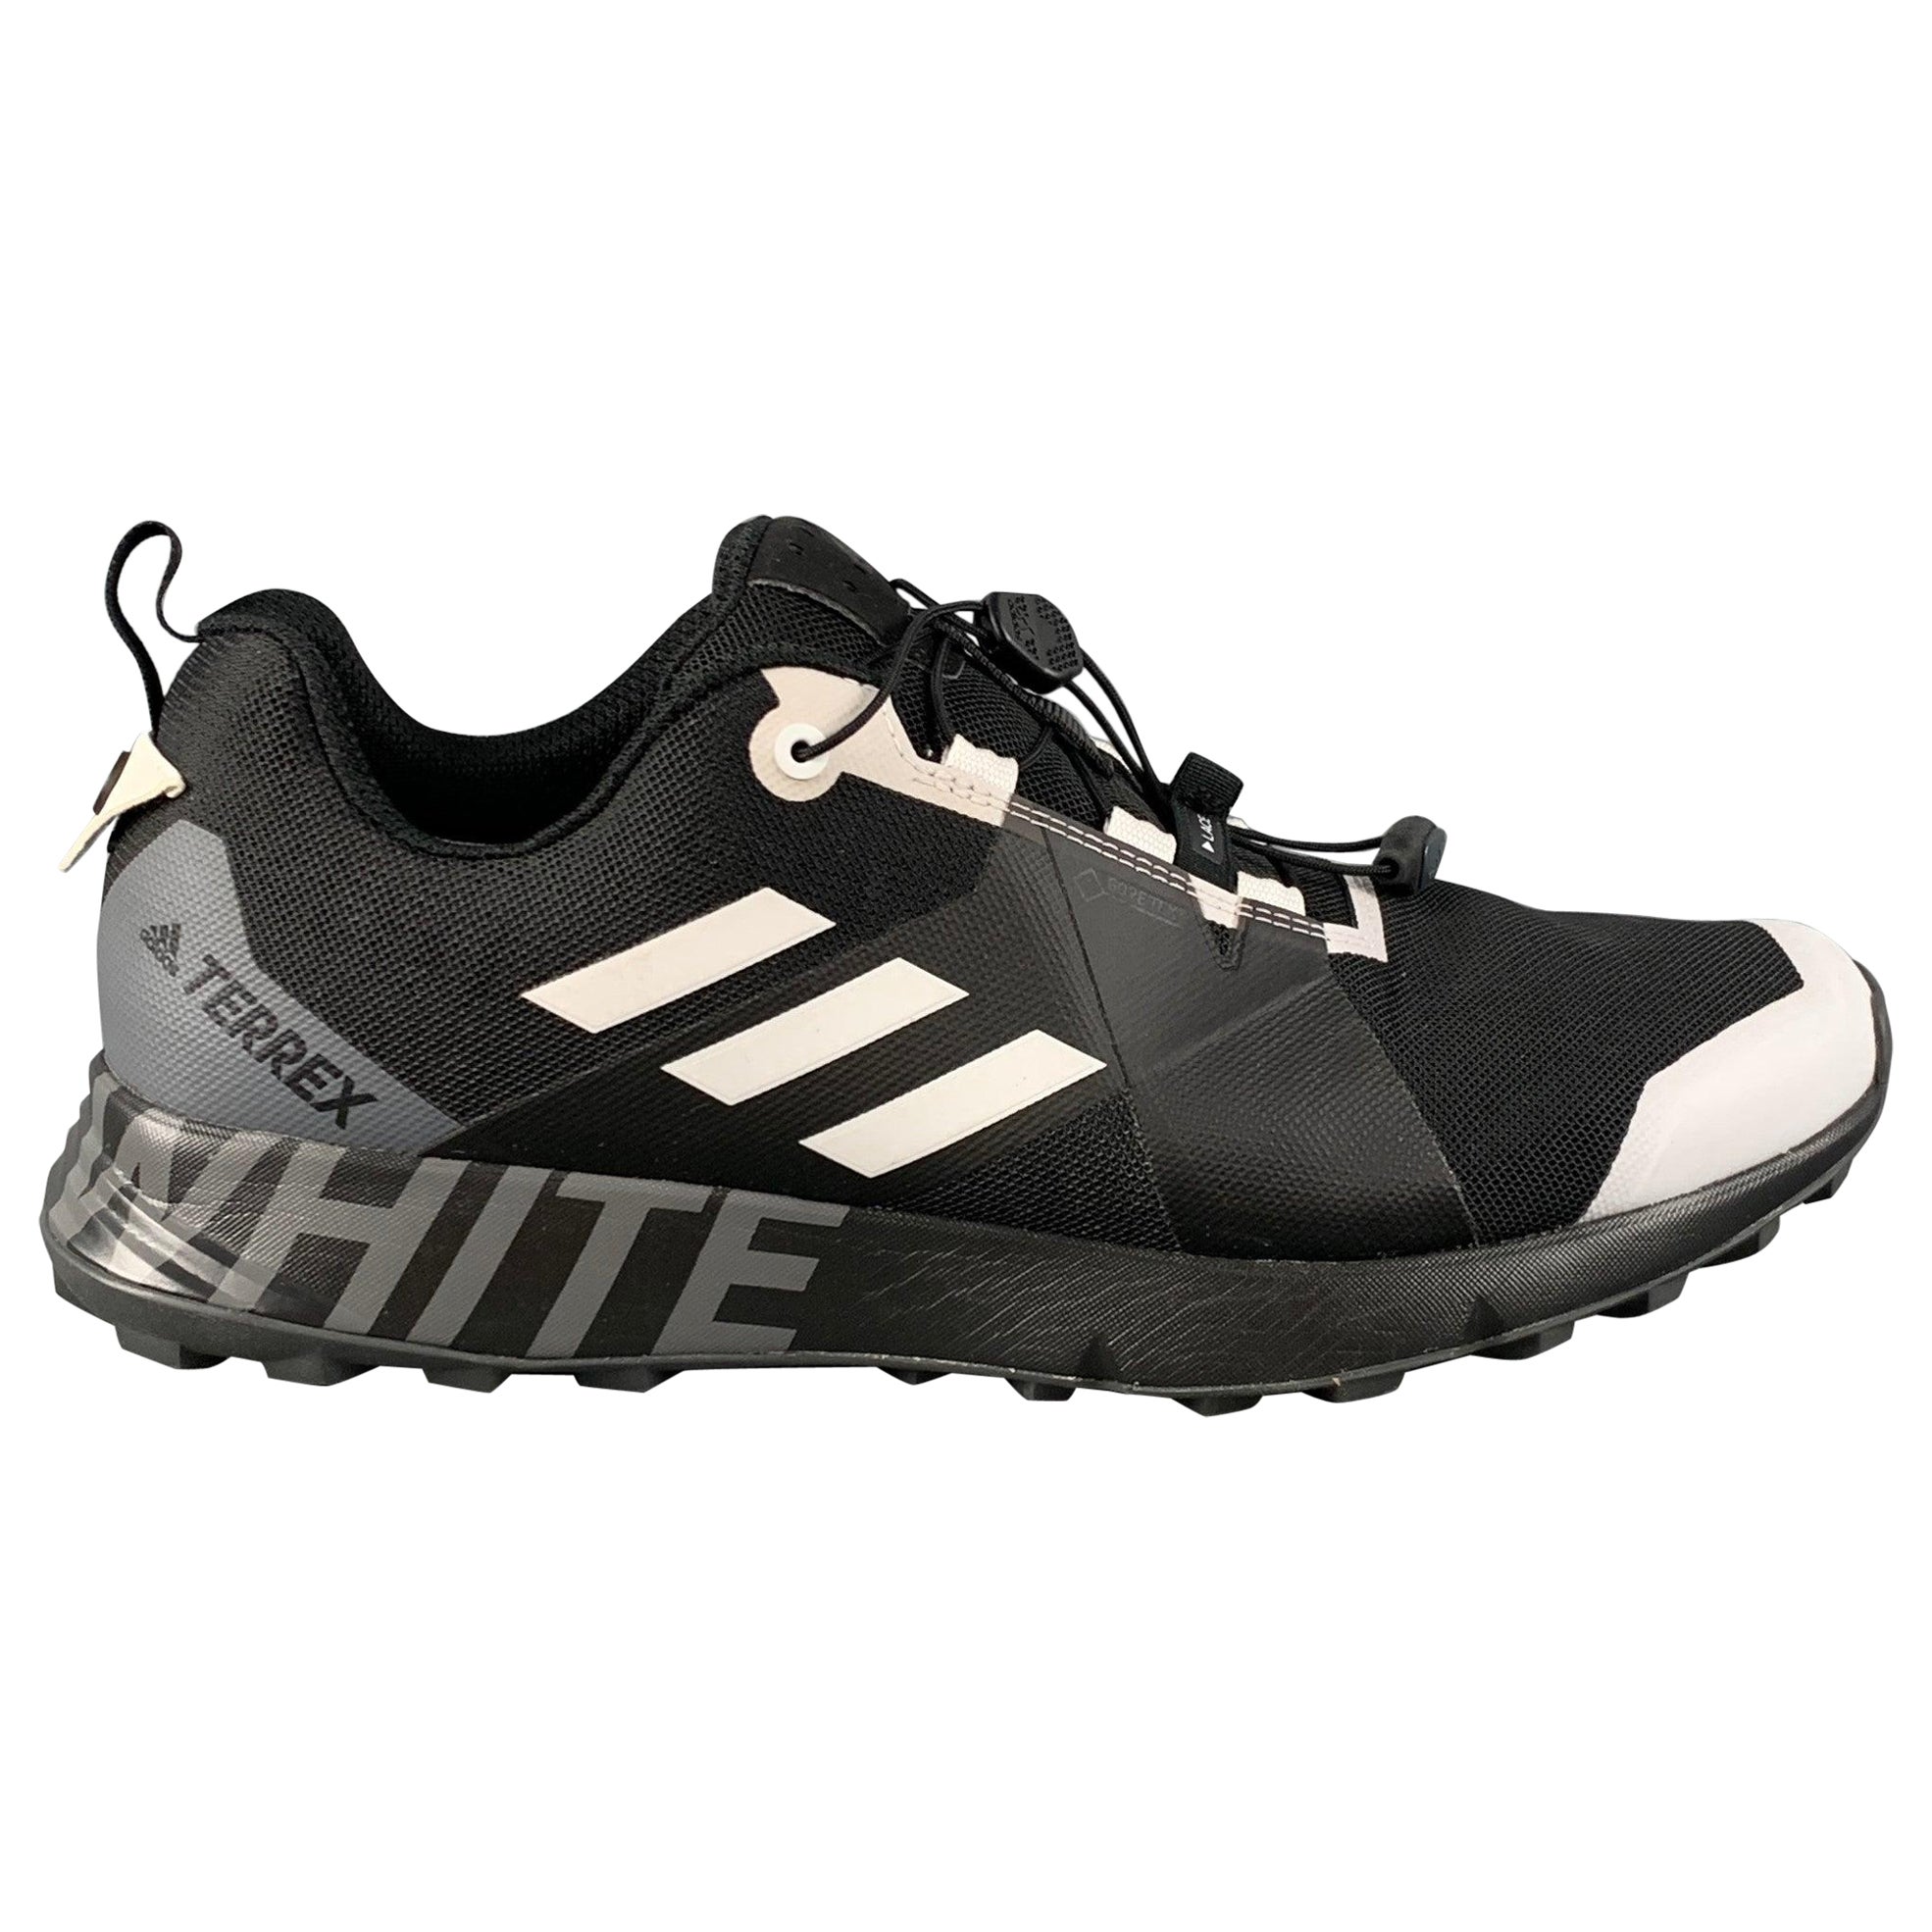 ADIDAS TERREX TWO GTX Size 10.5 Black White Nylon Lace Up Sneakers For Sale